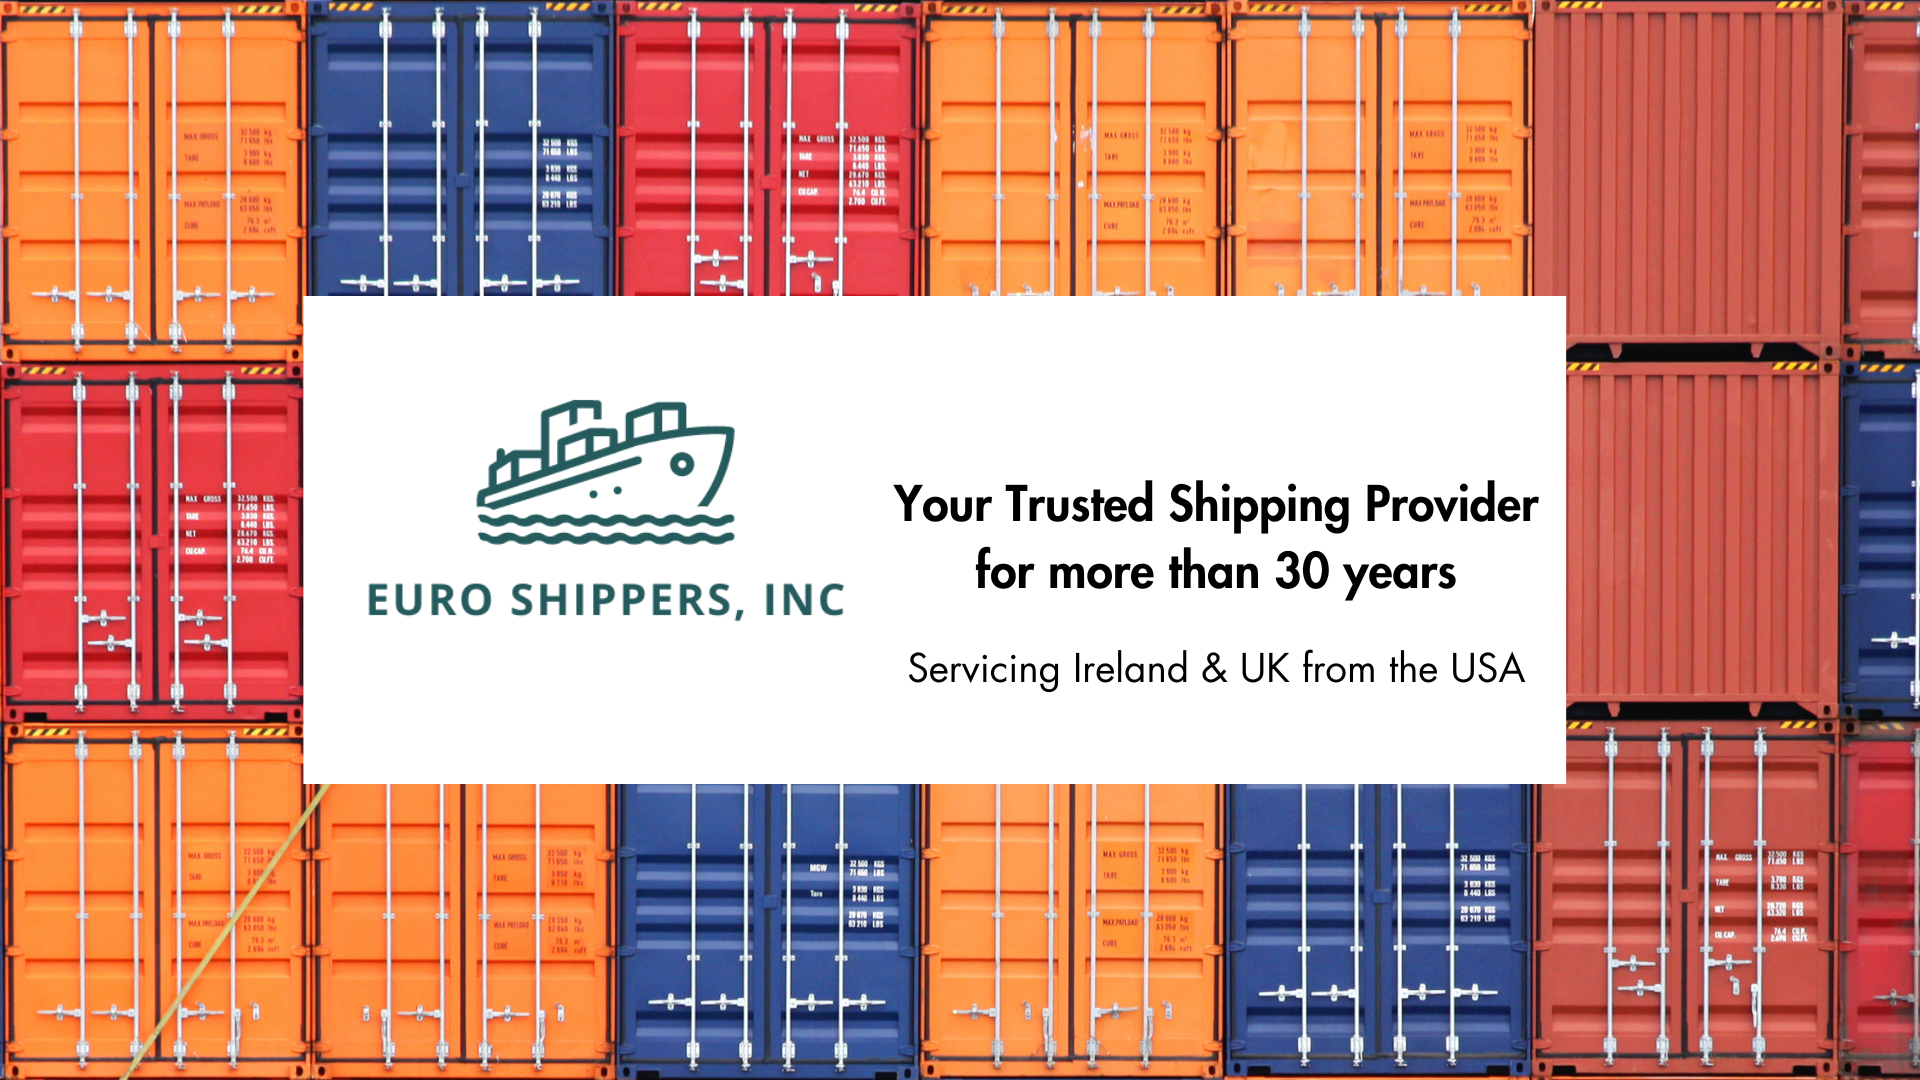 Euro Shippers Inc - Your Trusted Shipping Provider for More than 30 Years from the US to Ireland